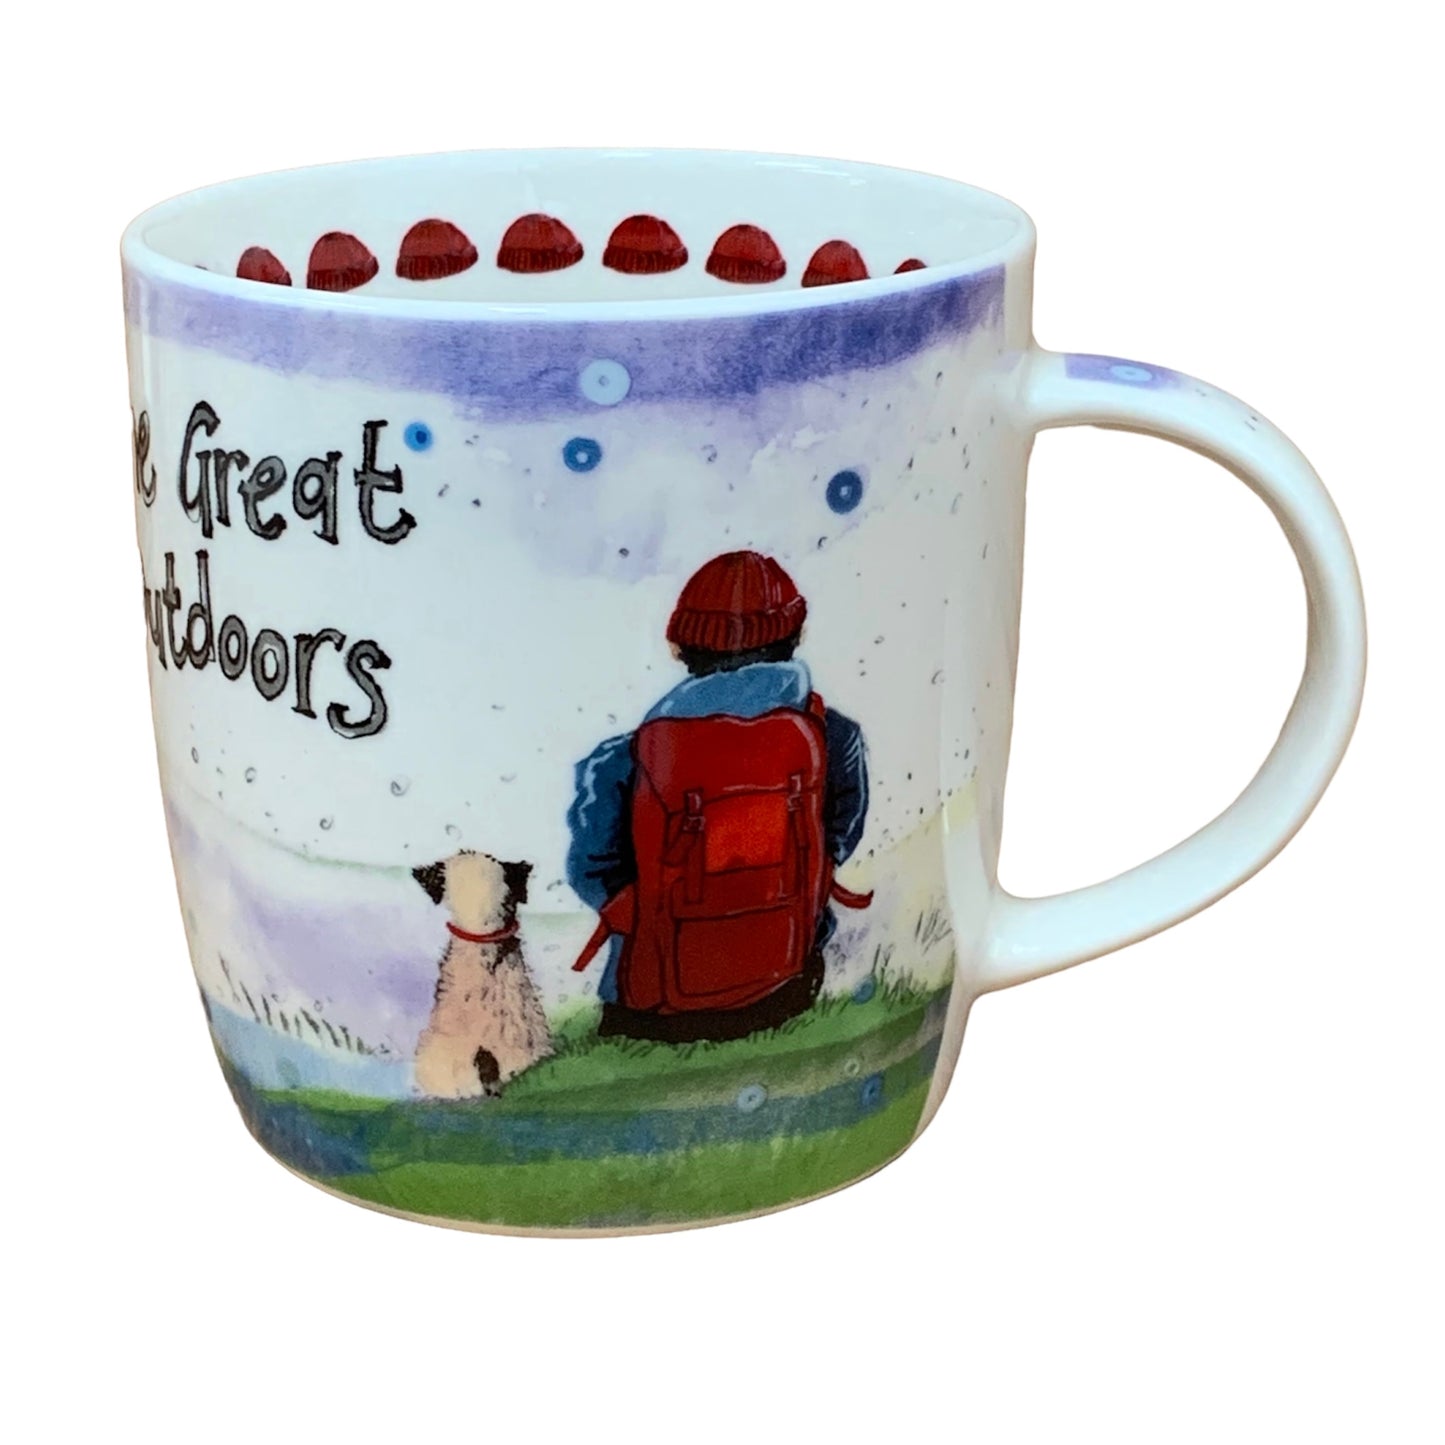 This Alex Clark mug is illustrated with a dog & its owner sitting & admiring the view and the words "The Great Outdoors" on the top of the mug.  This mug also features a red hats illustration around the inside rim & down the handle